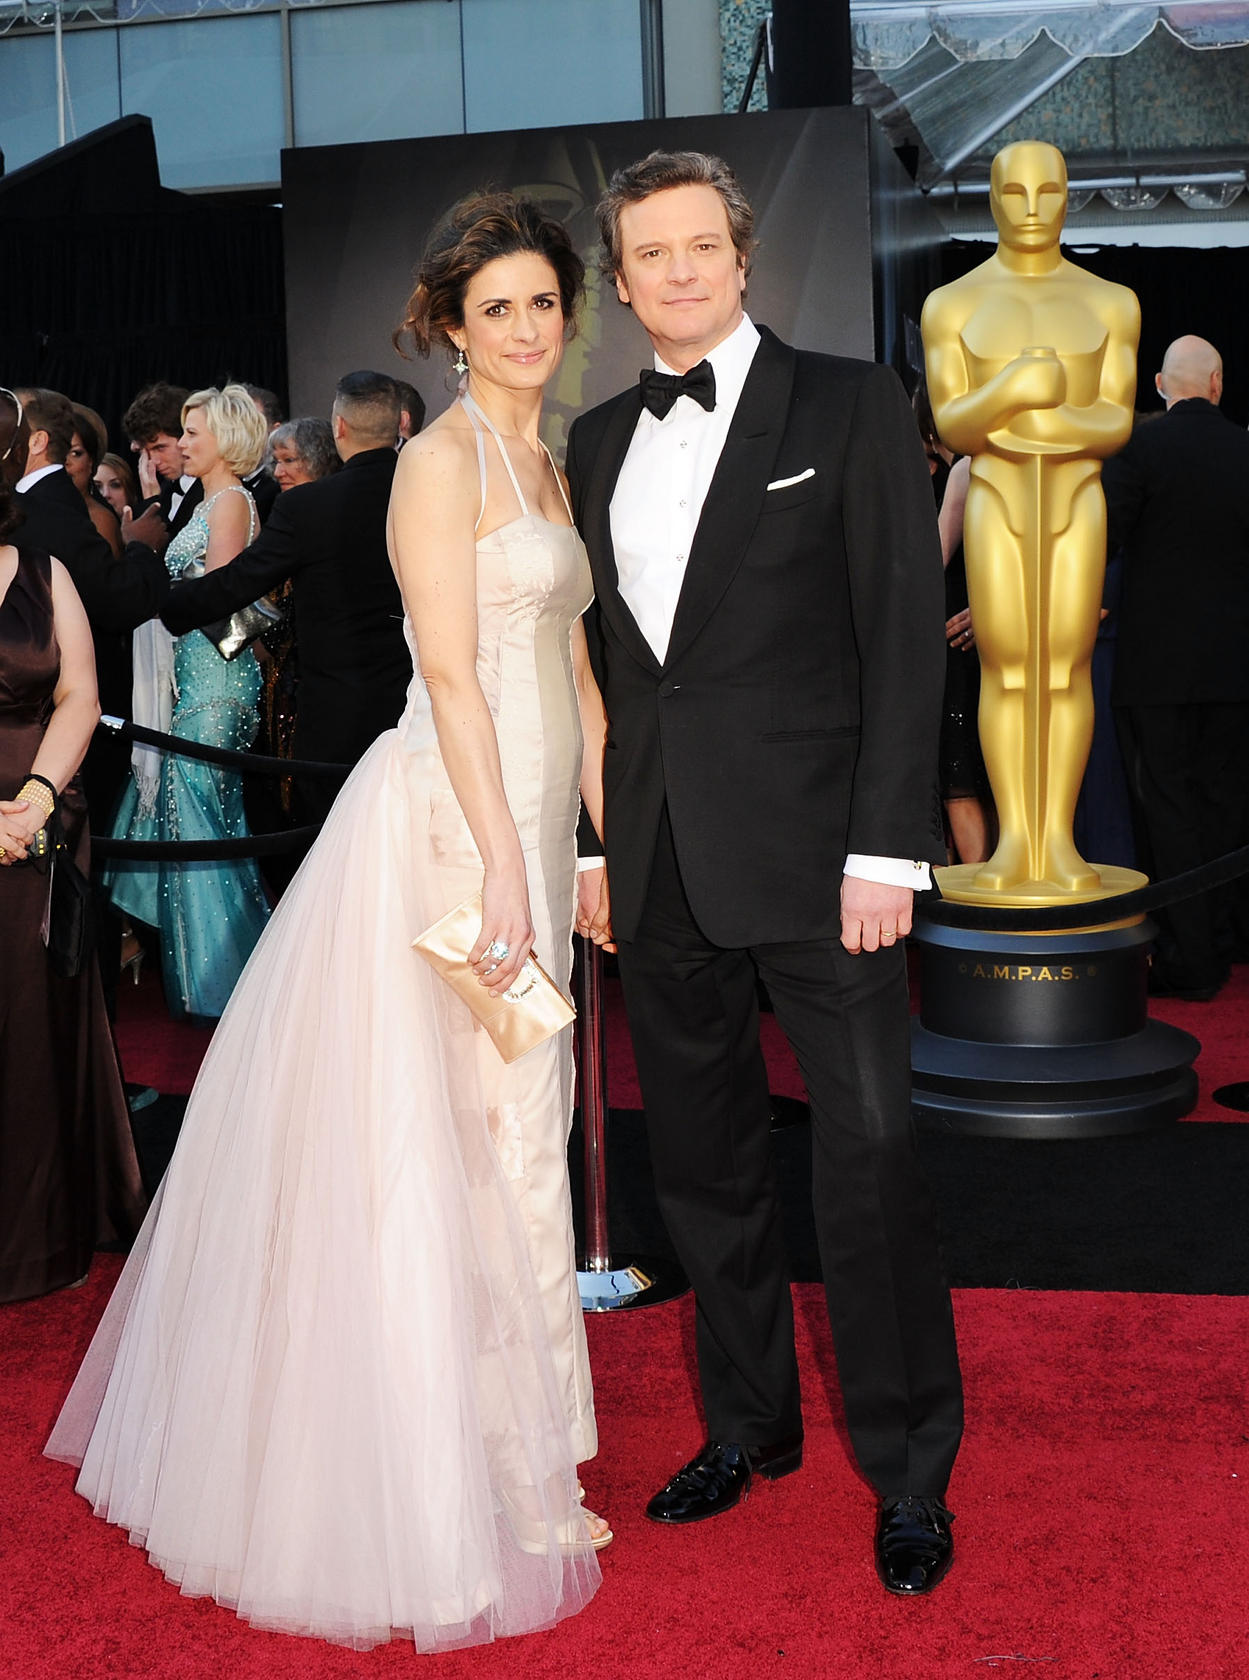 Livia and Colin Firth at the Academy Awards in 2011. Livia is wearing a Gary Harvey dress that's patched together from 11 vintage frocks. Photo: AFP